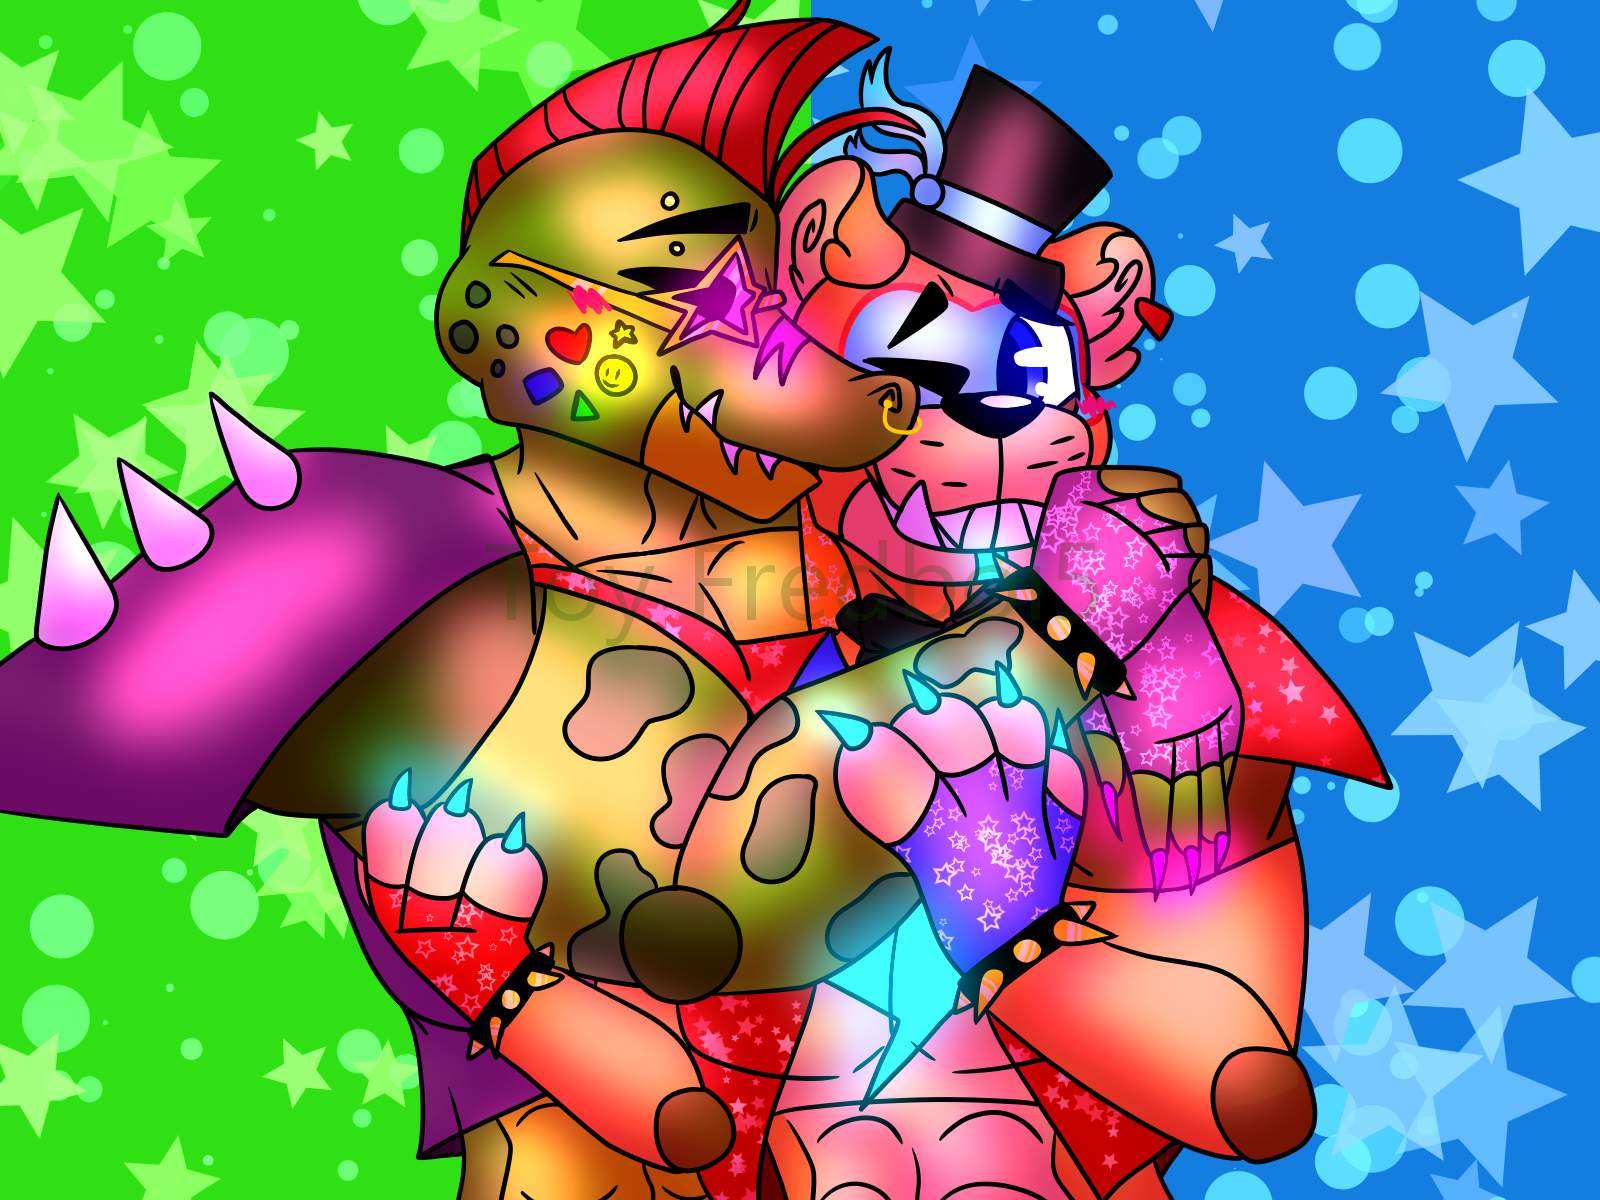 Monty x Glamrock Freddy because they're cute together :>  ...